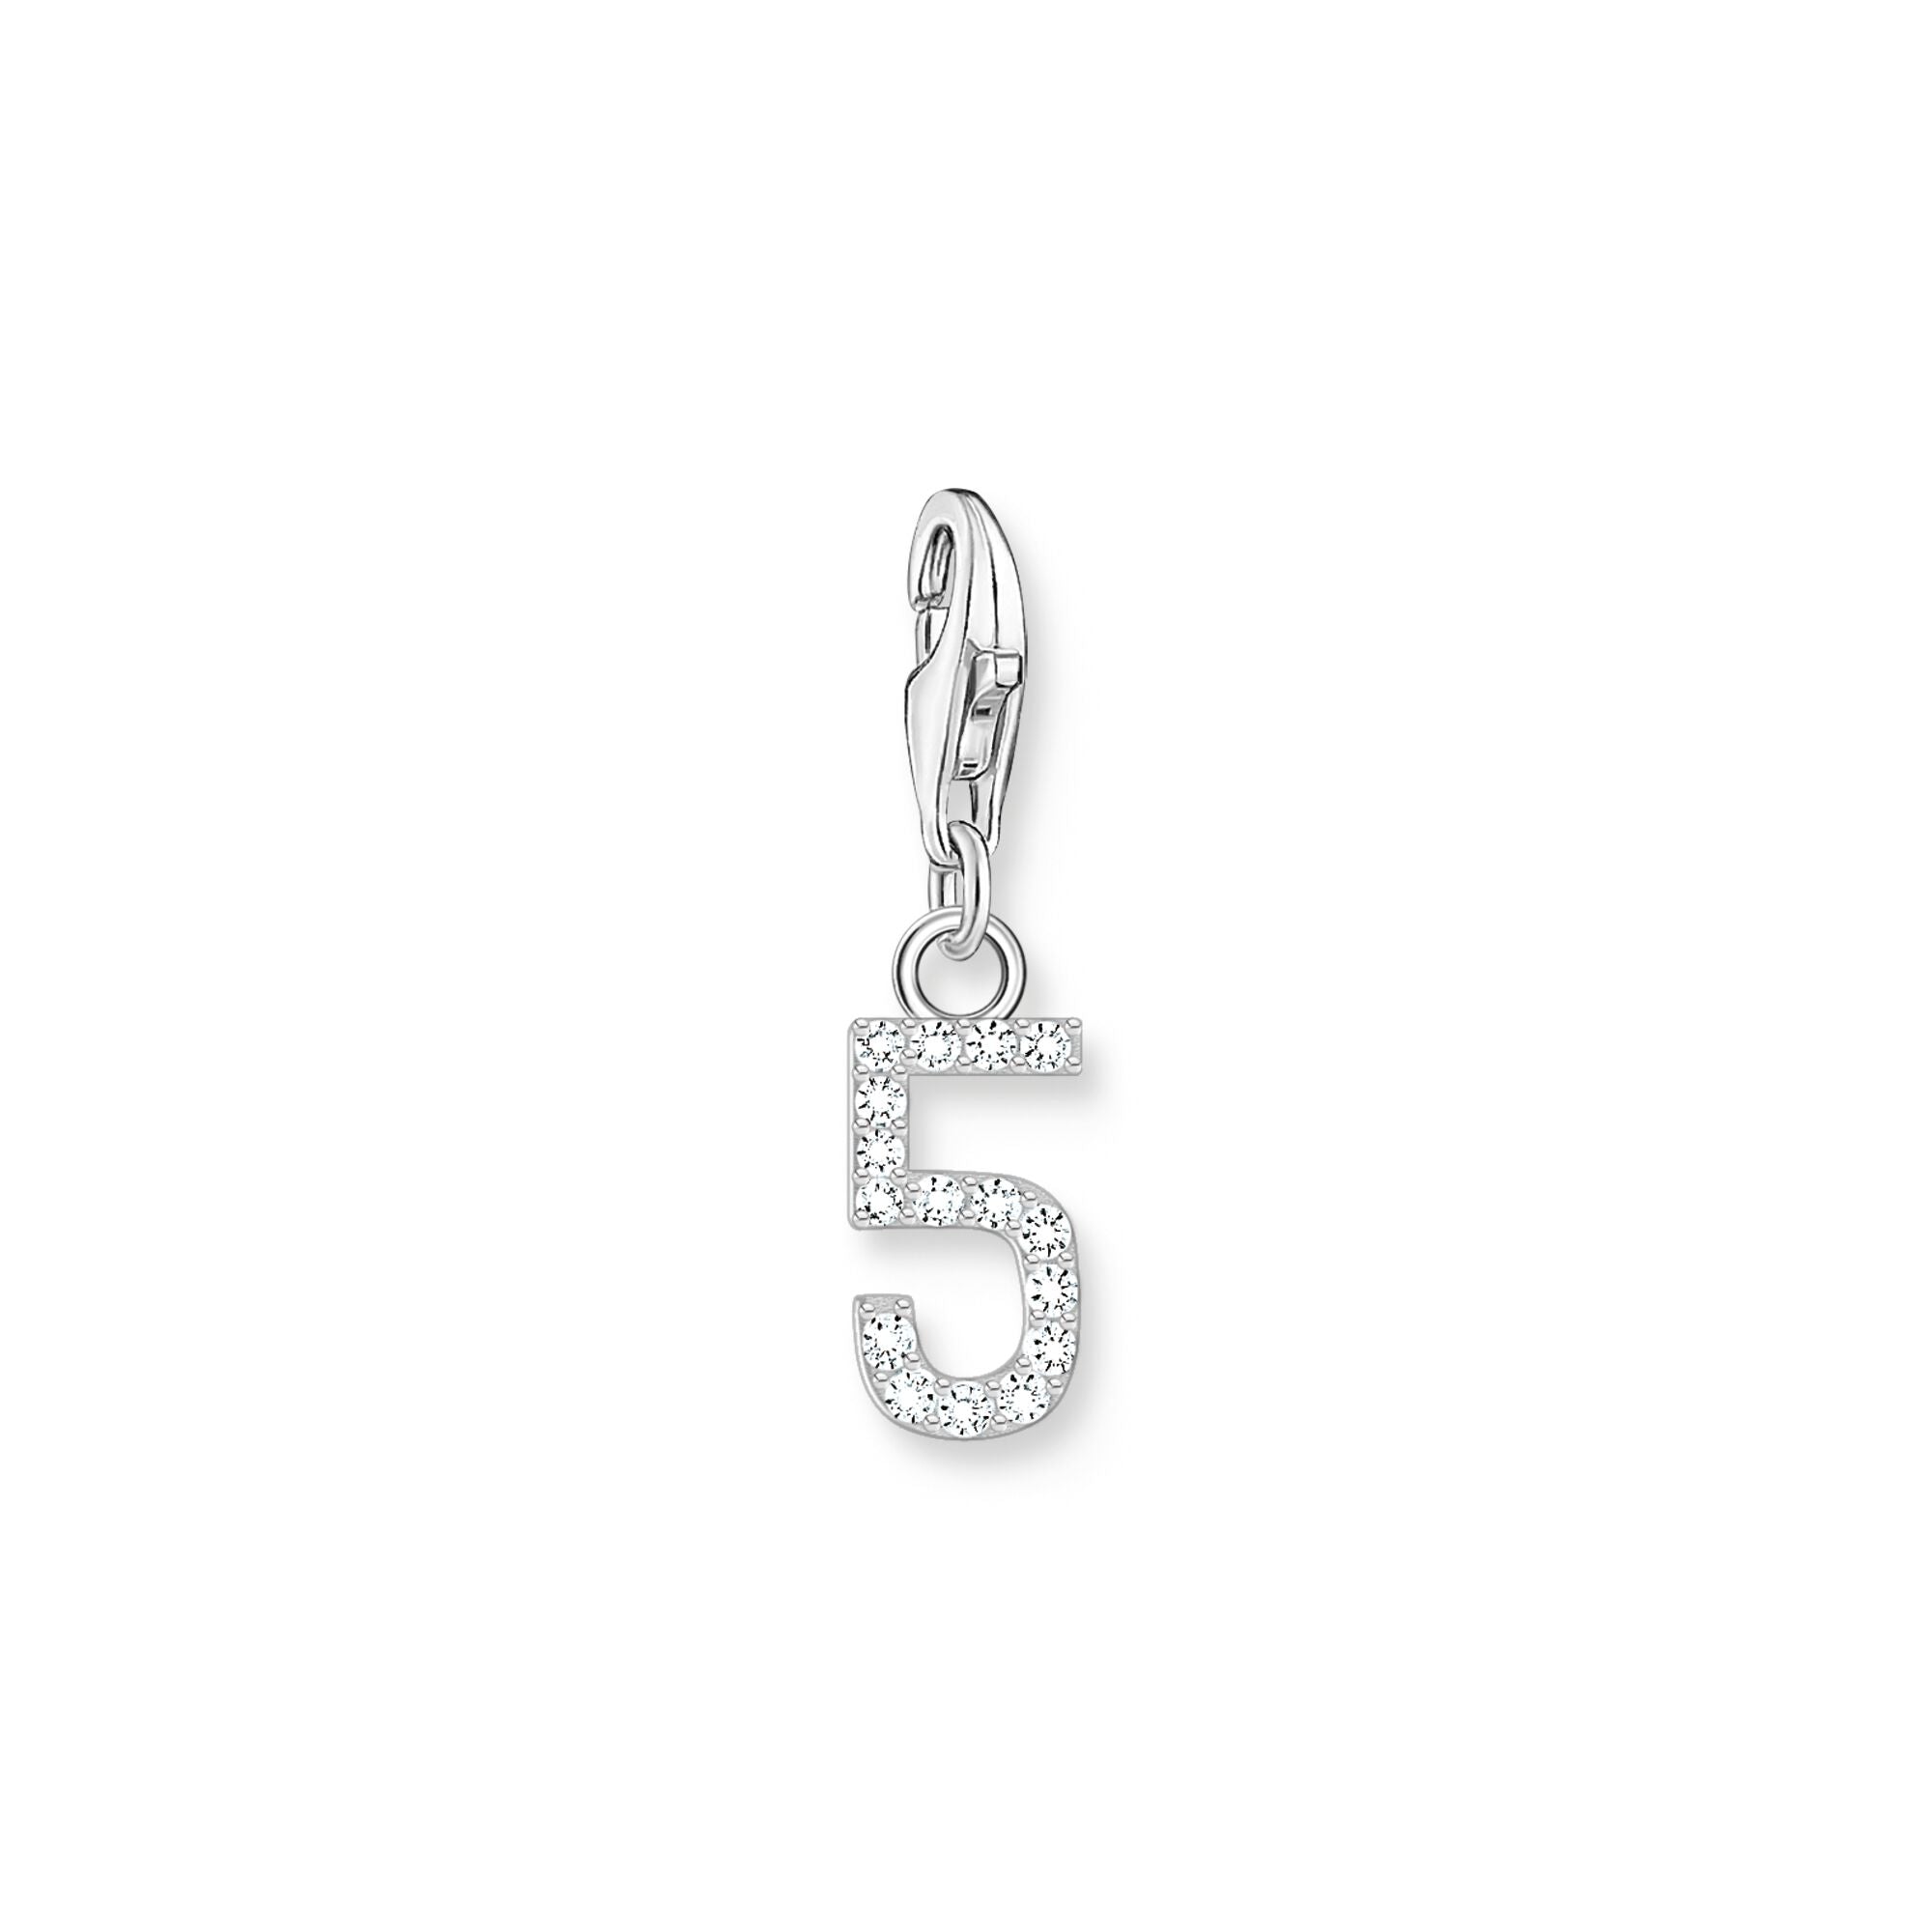 number "5" silver charm sterling silver thomas sabo